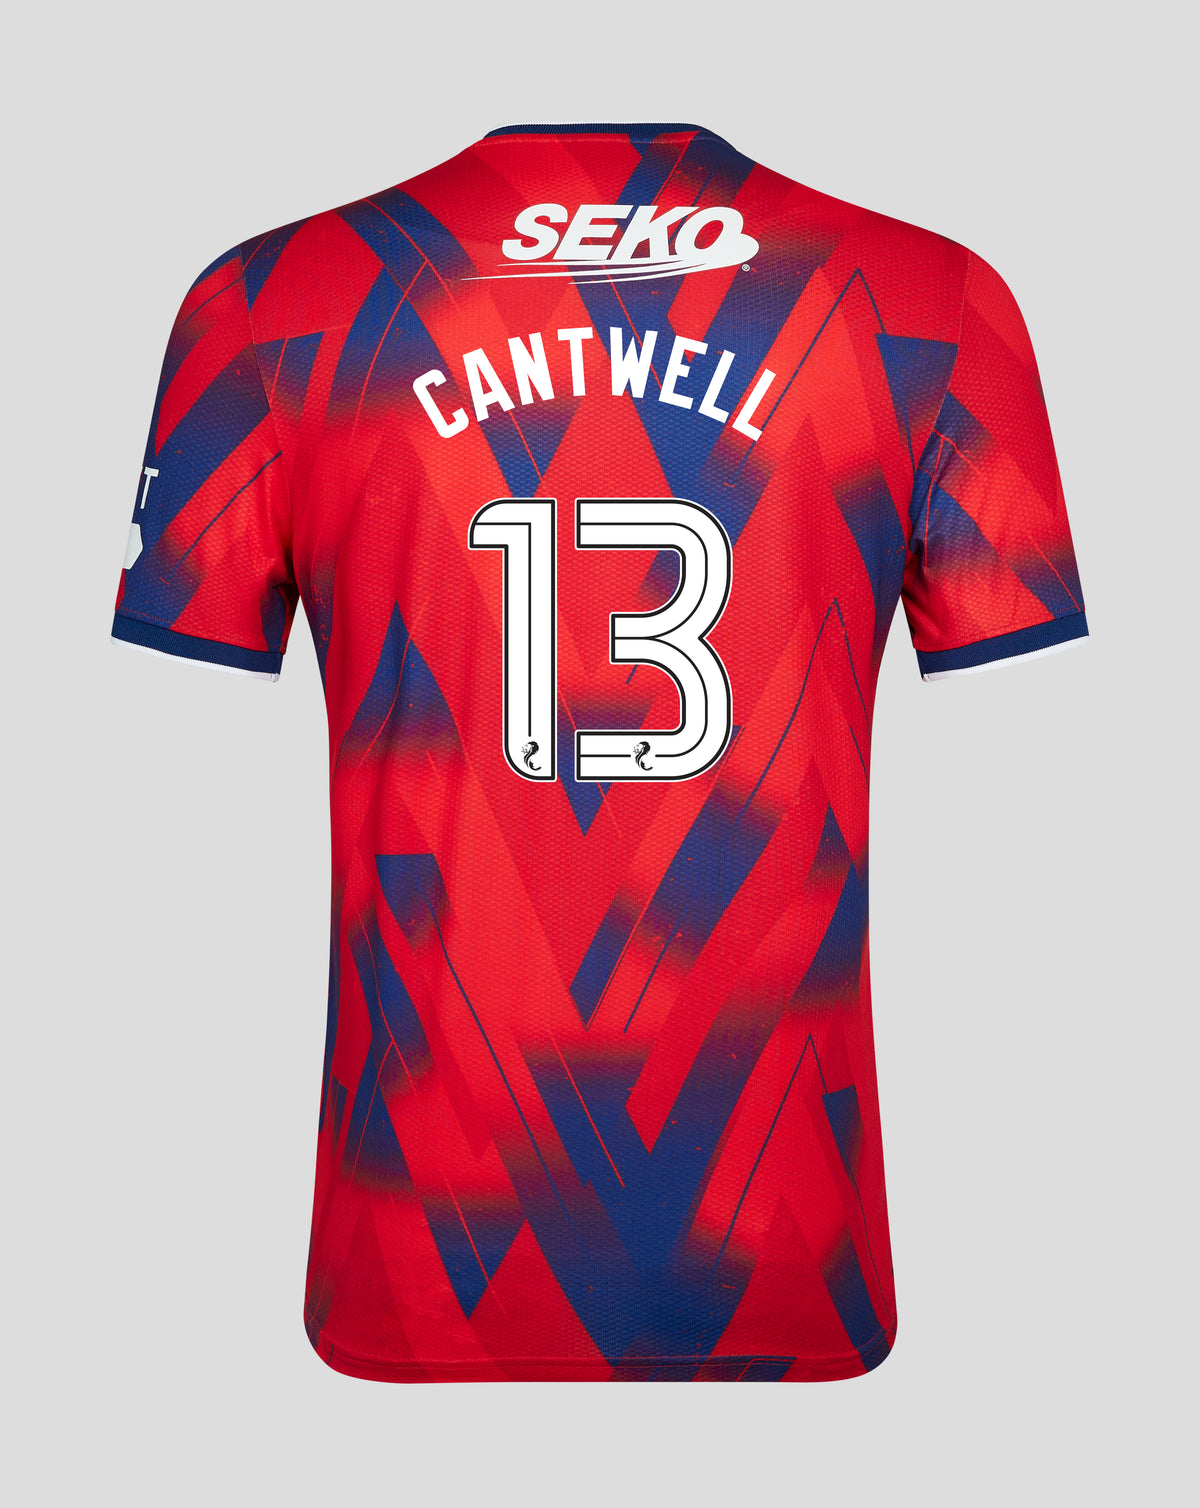 Cantwell - Fourth Kit